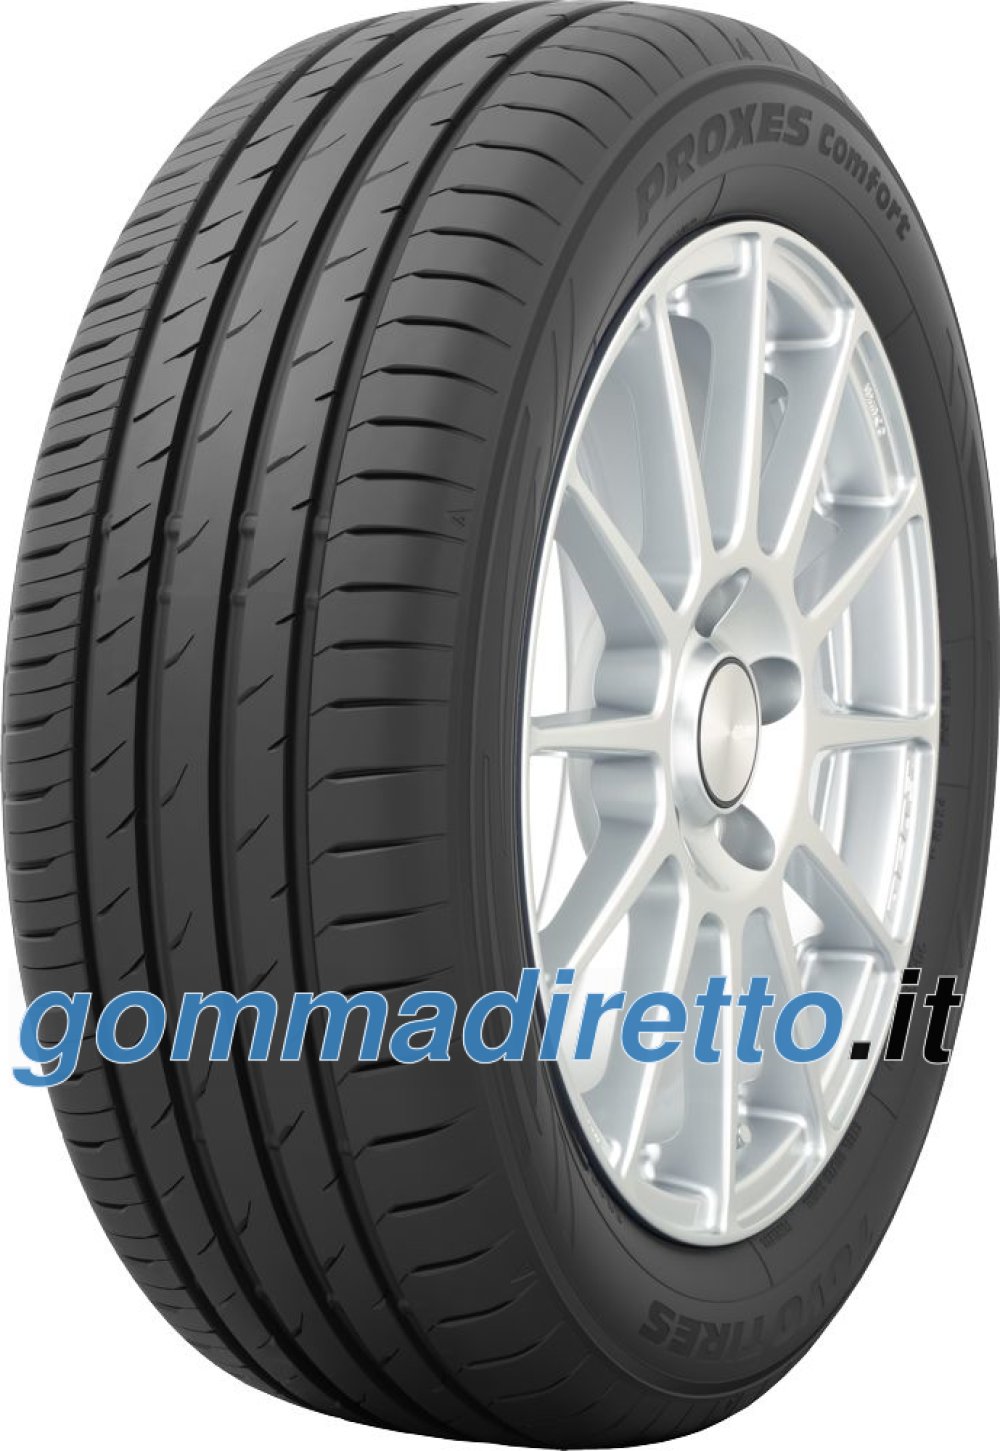 Image of Toyo Proxes Comfort ( 225/50 R17 98W XL )